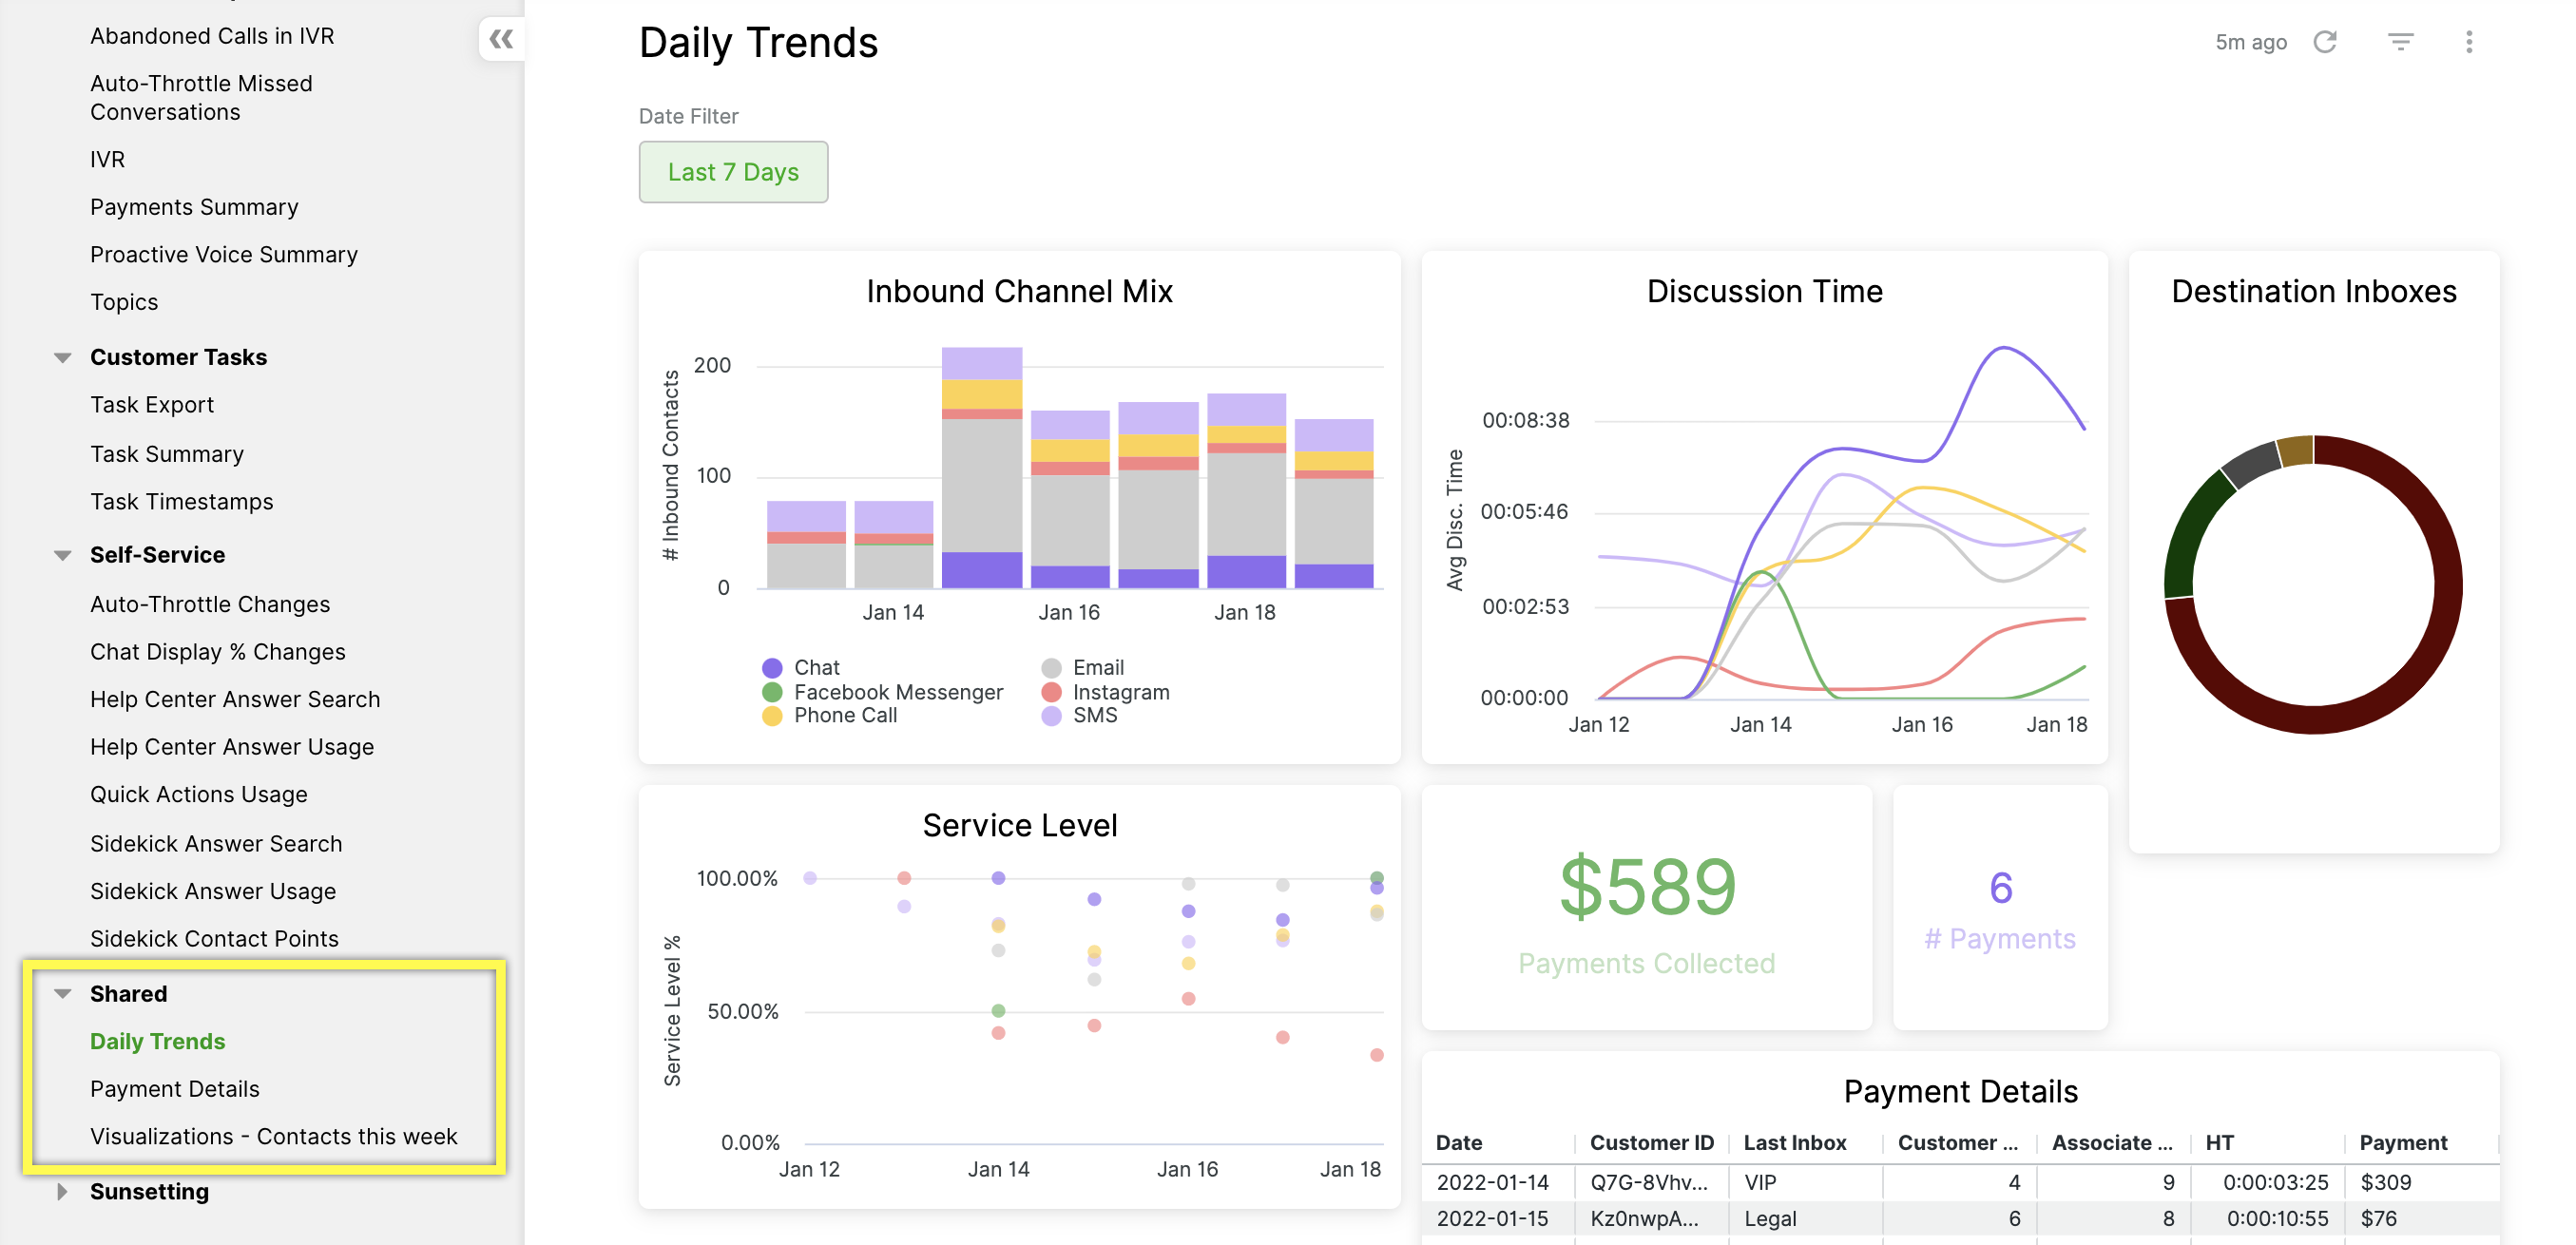 Daily Trends dashboard